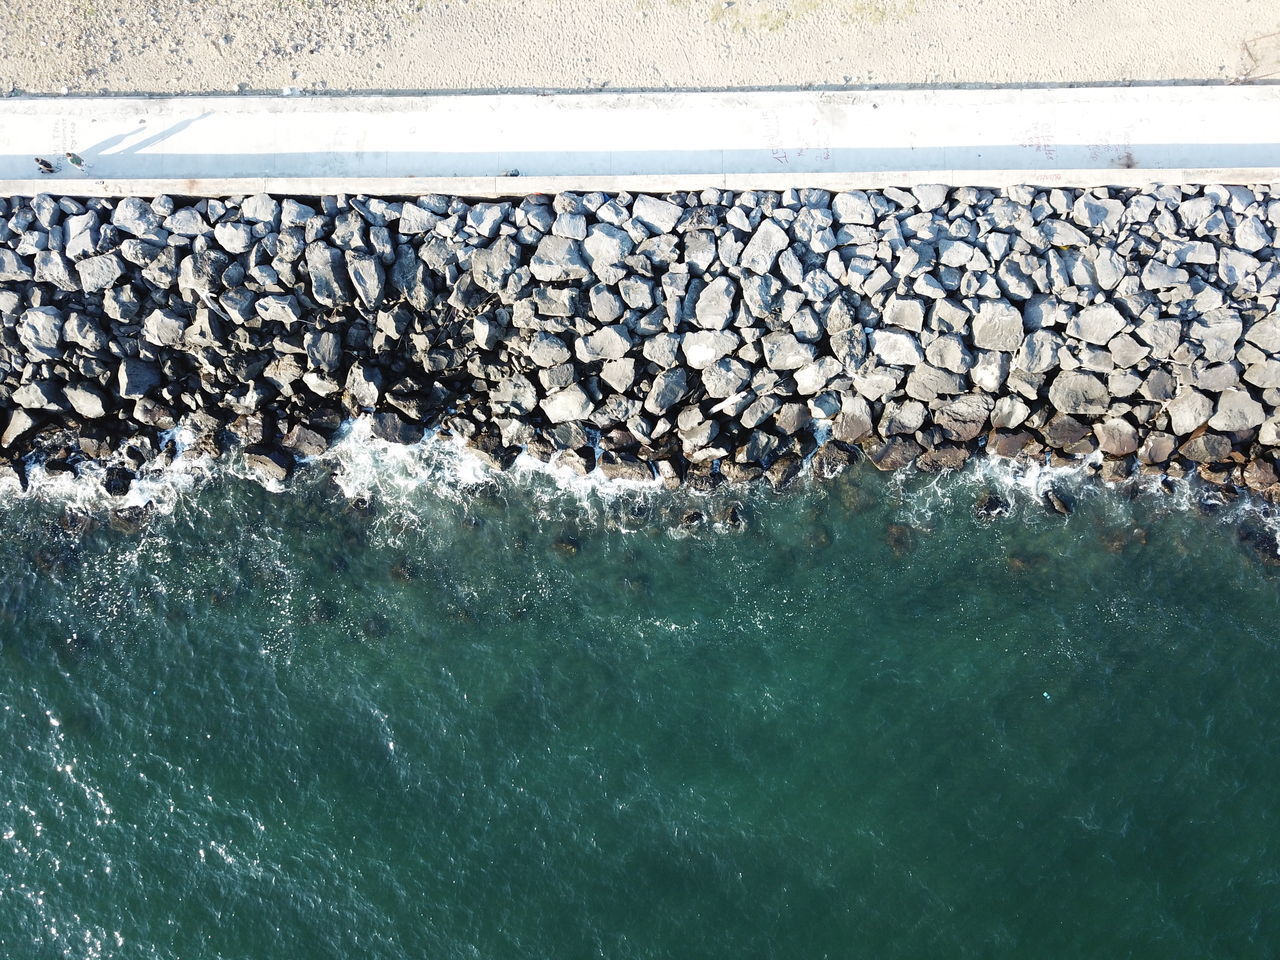 HIGH ANGLE VIEW OF STONES IN SEA